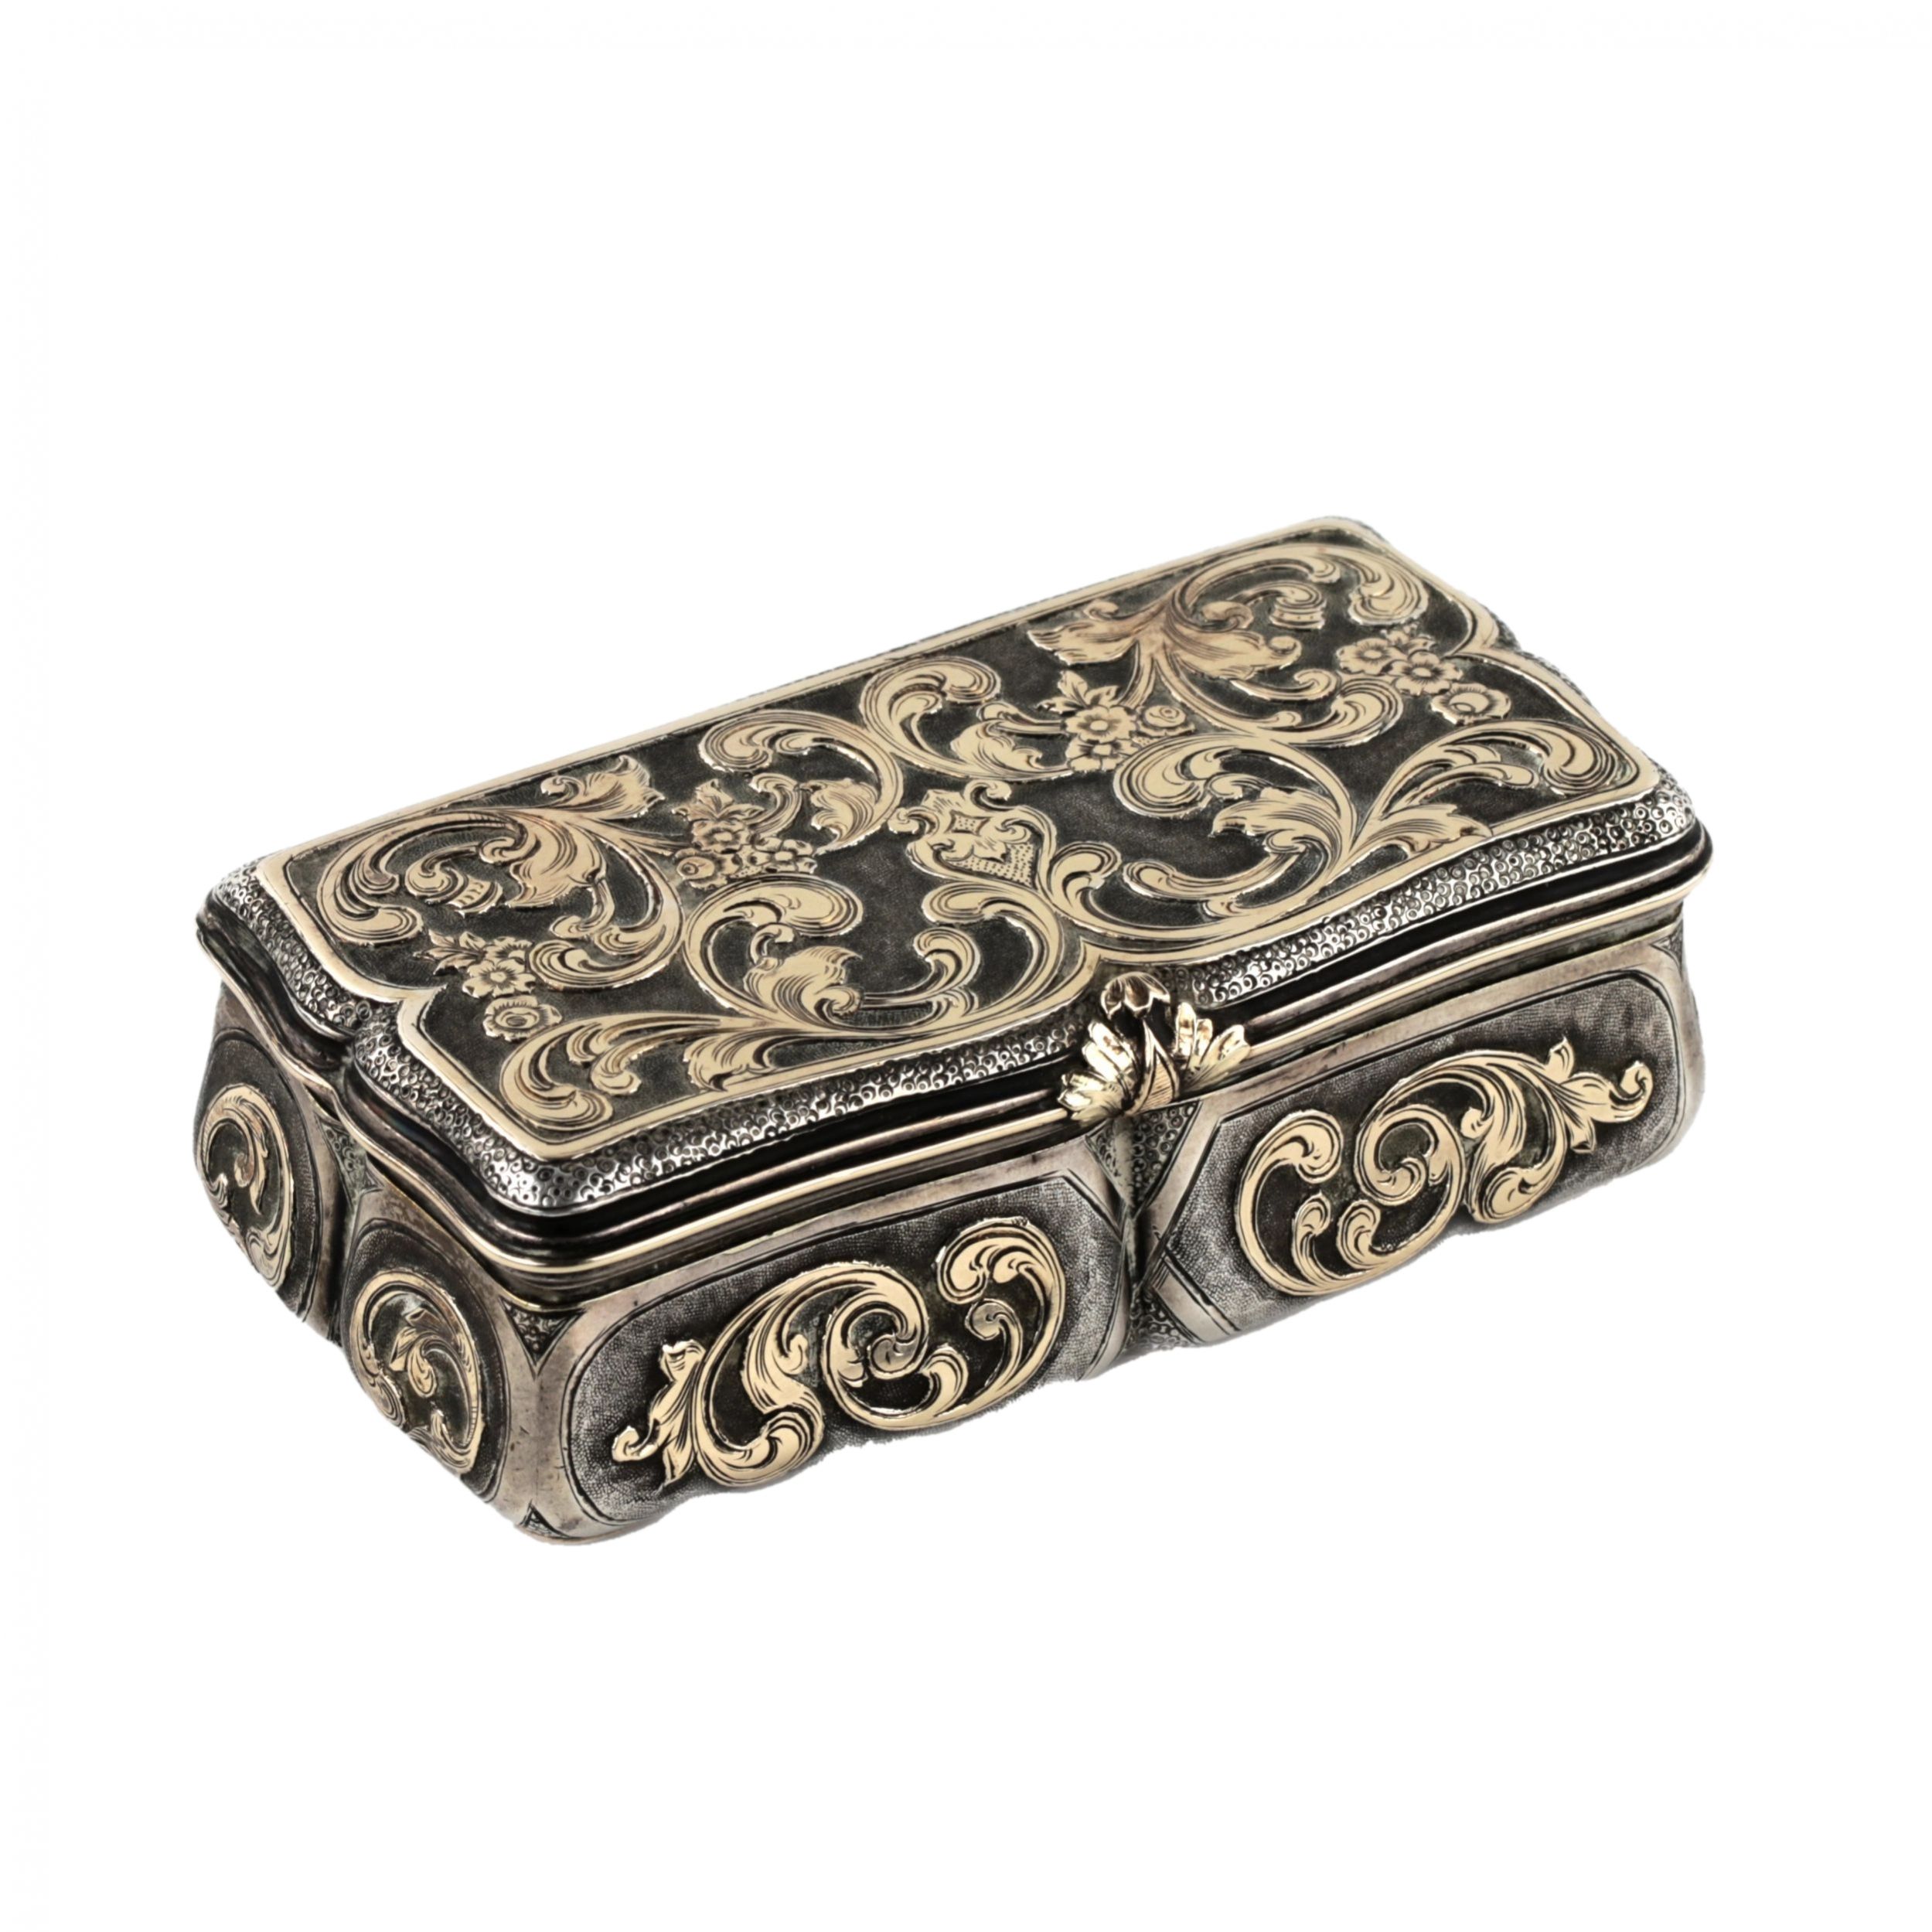 Russian-silver-snuffbox-with-gold-decor-Mid-19th-century-